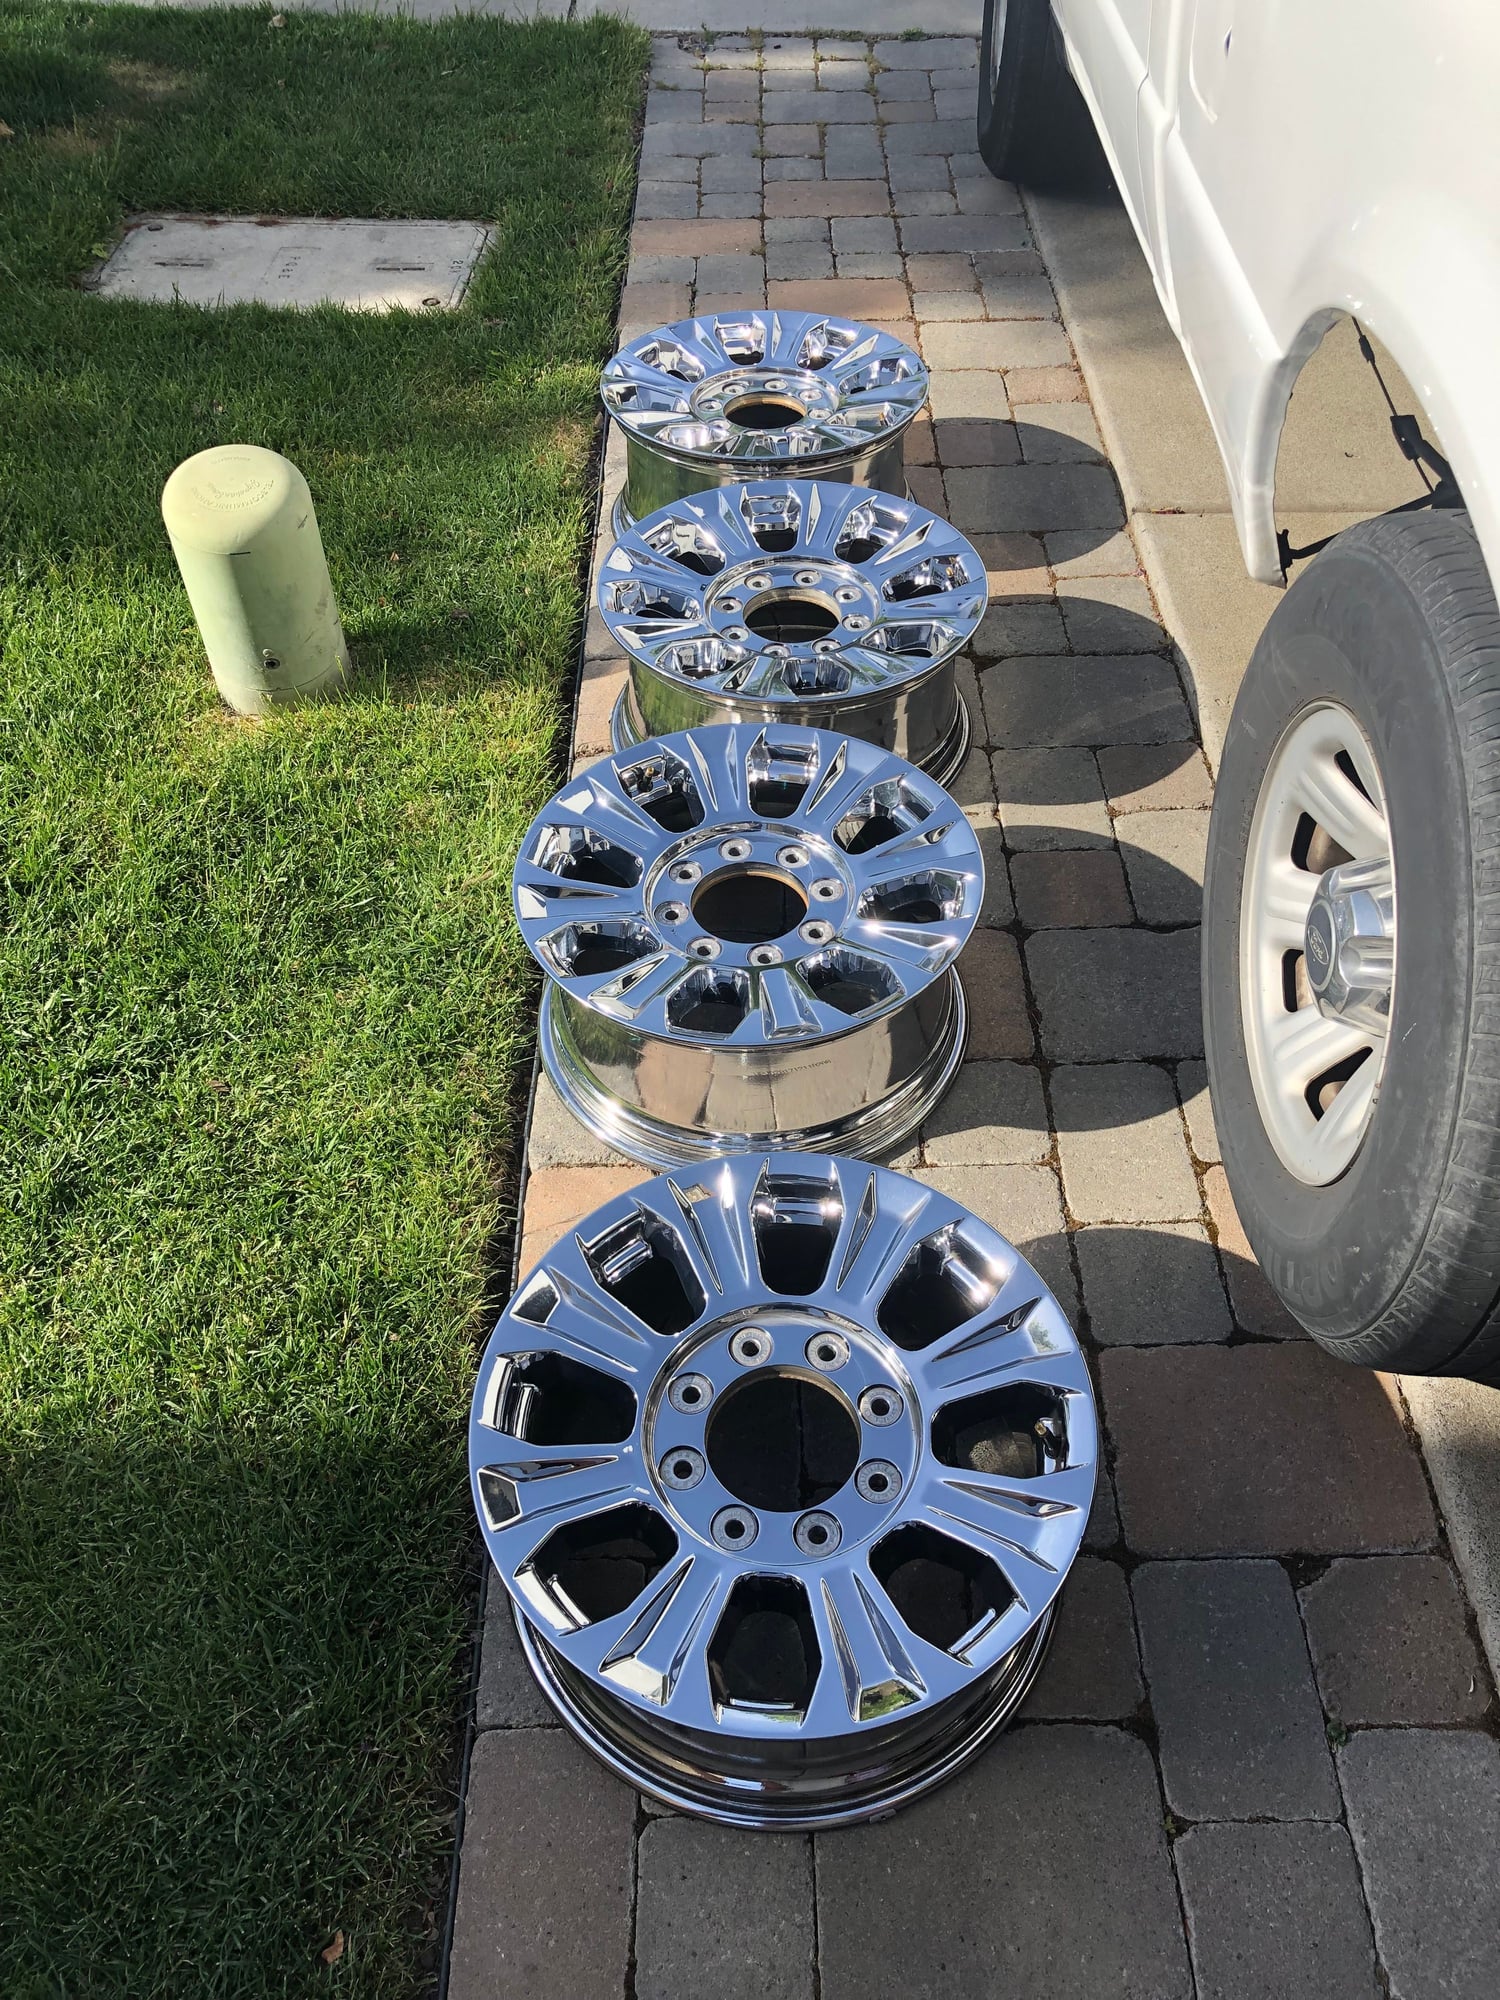 Wheels and Tires/Axles - 2018 Chrome 18" chrome F350 wheels - Used - All Years Ford 1 Ton Pickup - Lincoln, CA 95648, United States